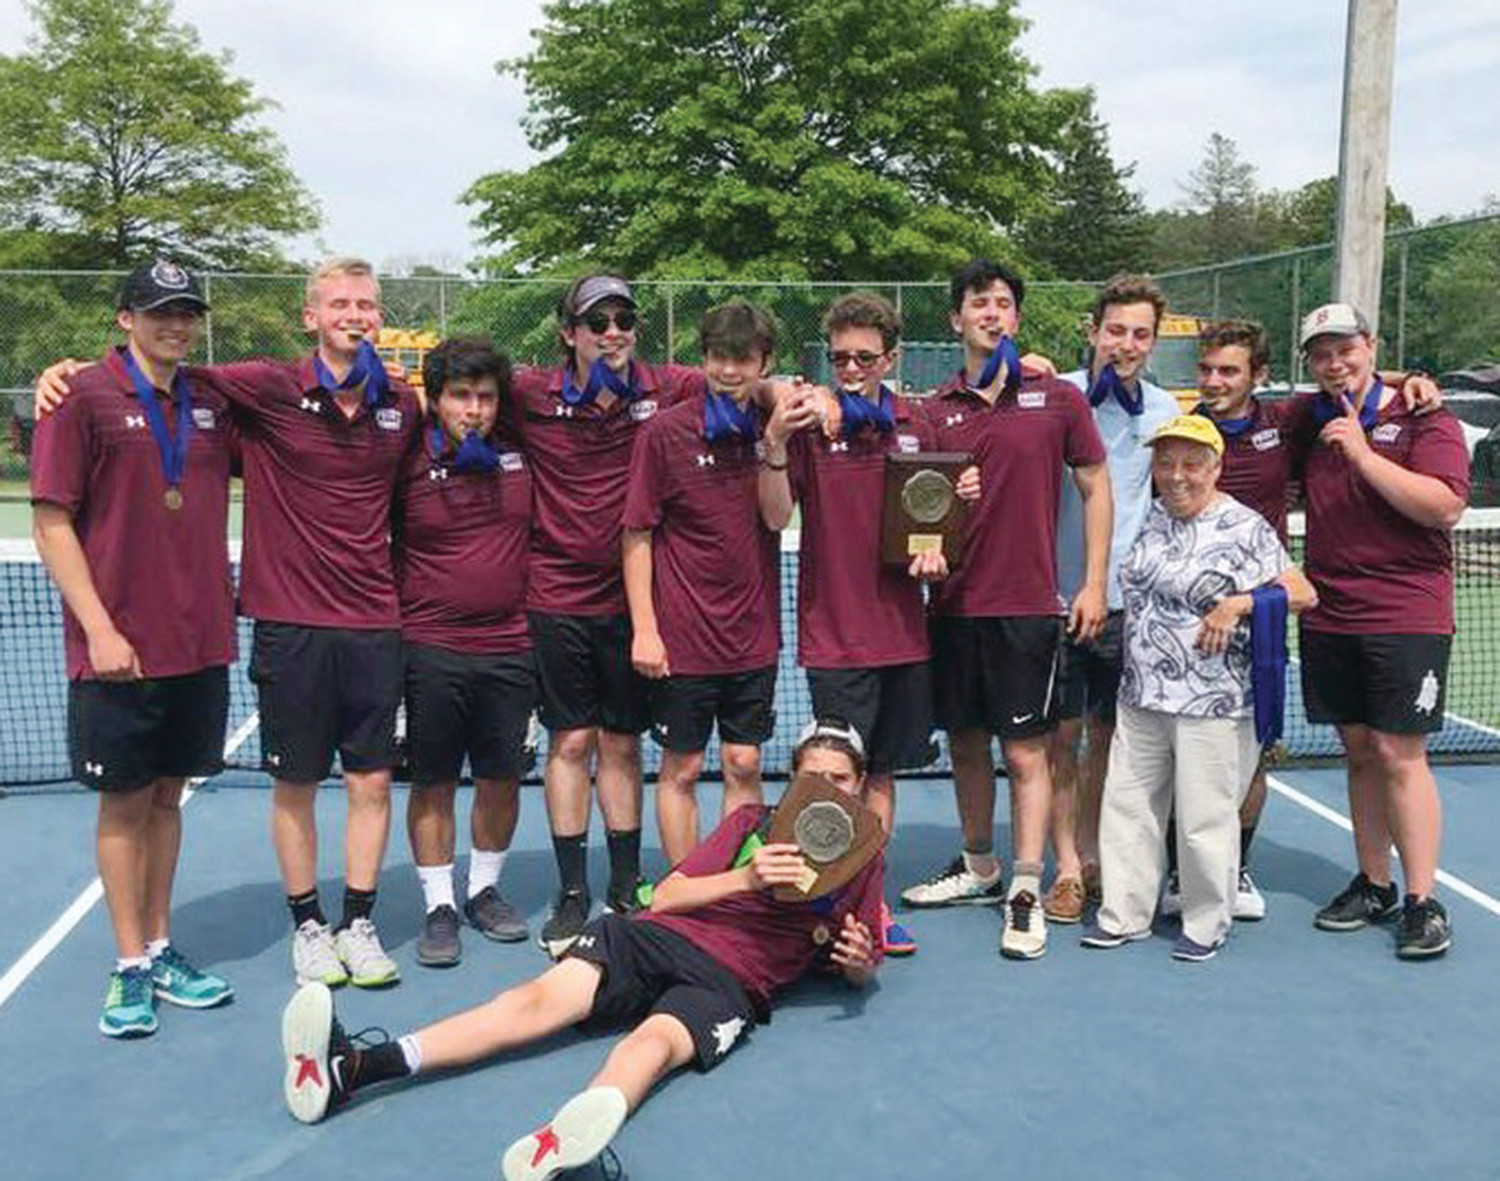 Coach Mary Lou Morissette, third from right, with The Prout School’s 2018 championship boys’ tennis team at Slater Park.